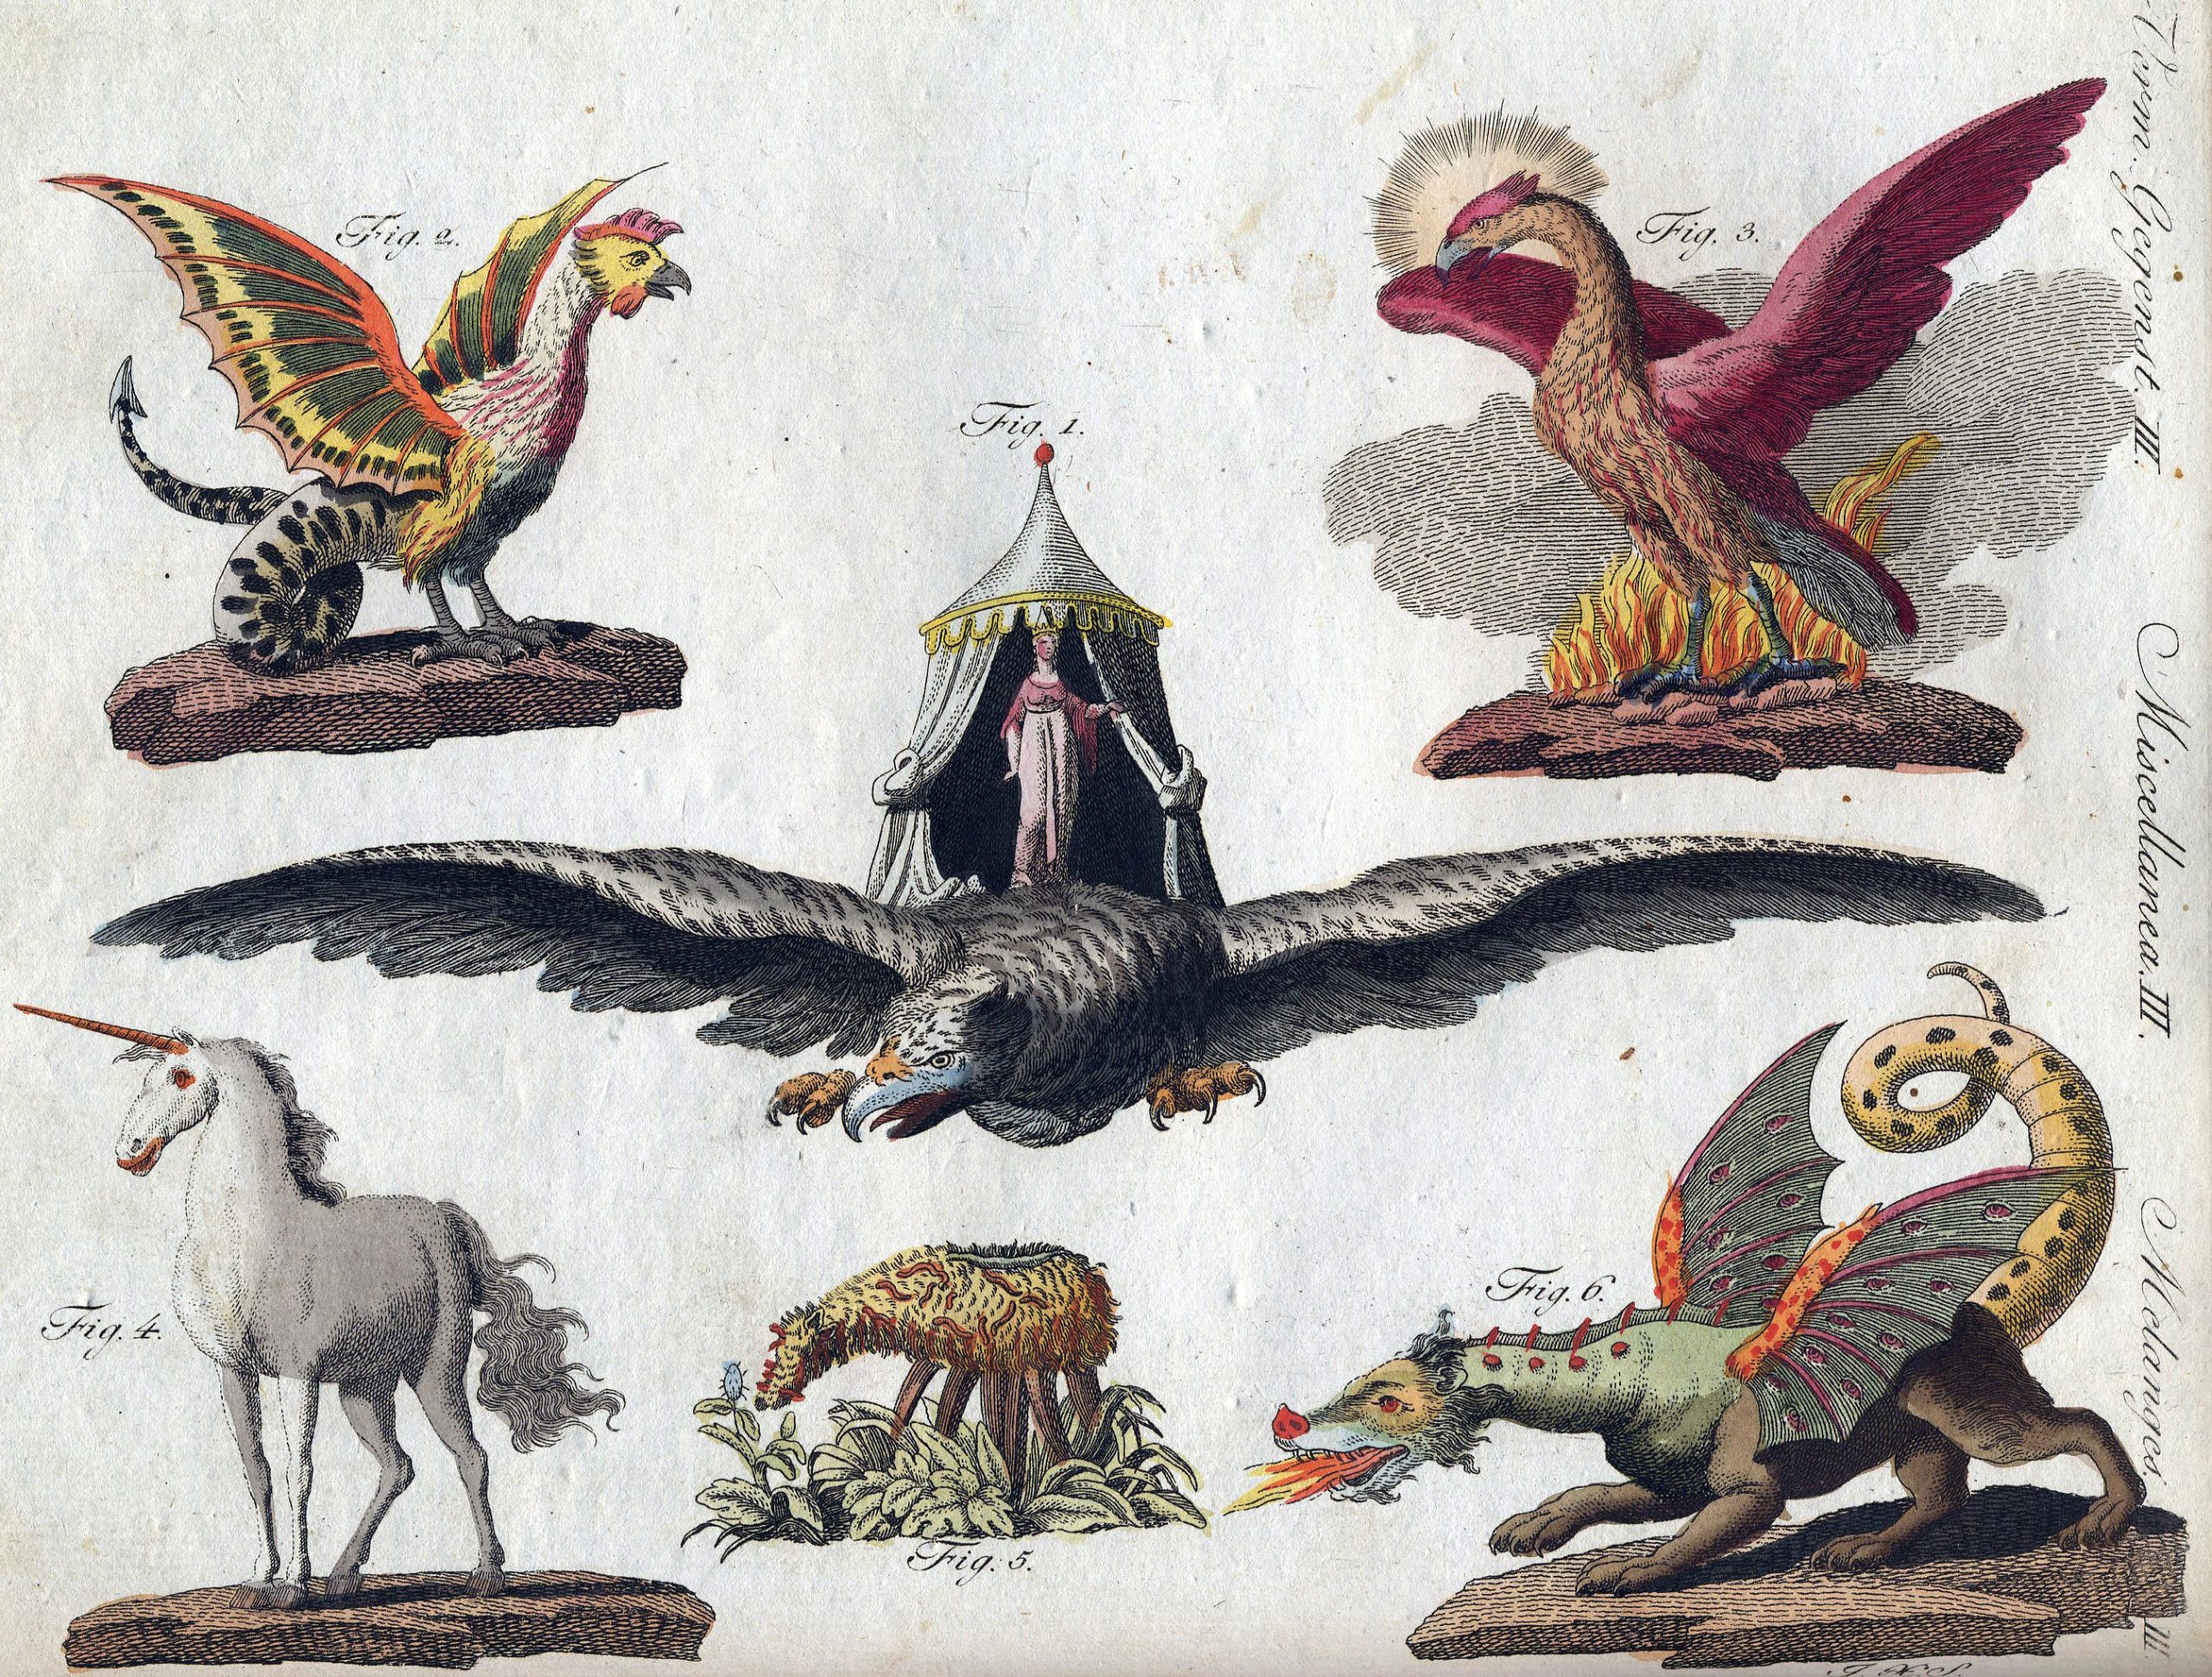 An assortment of illustrations of mythical creatures.